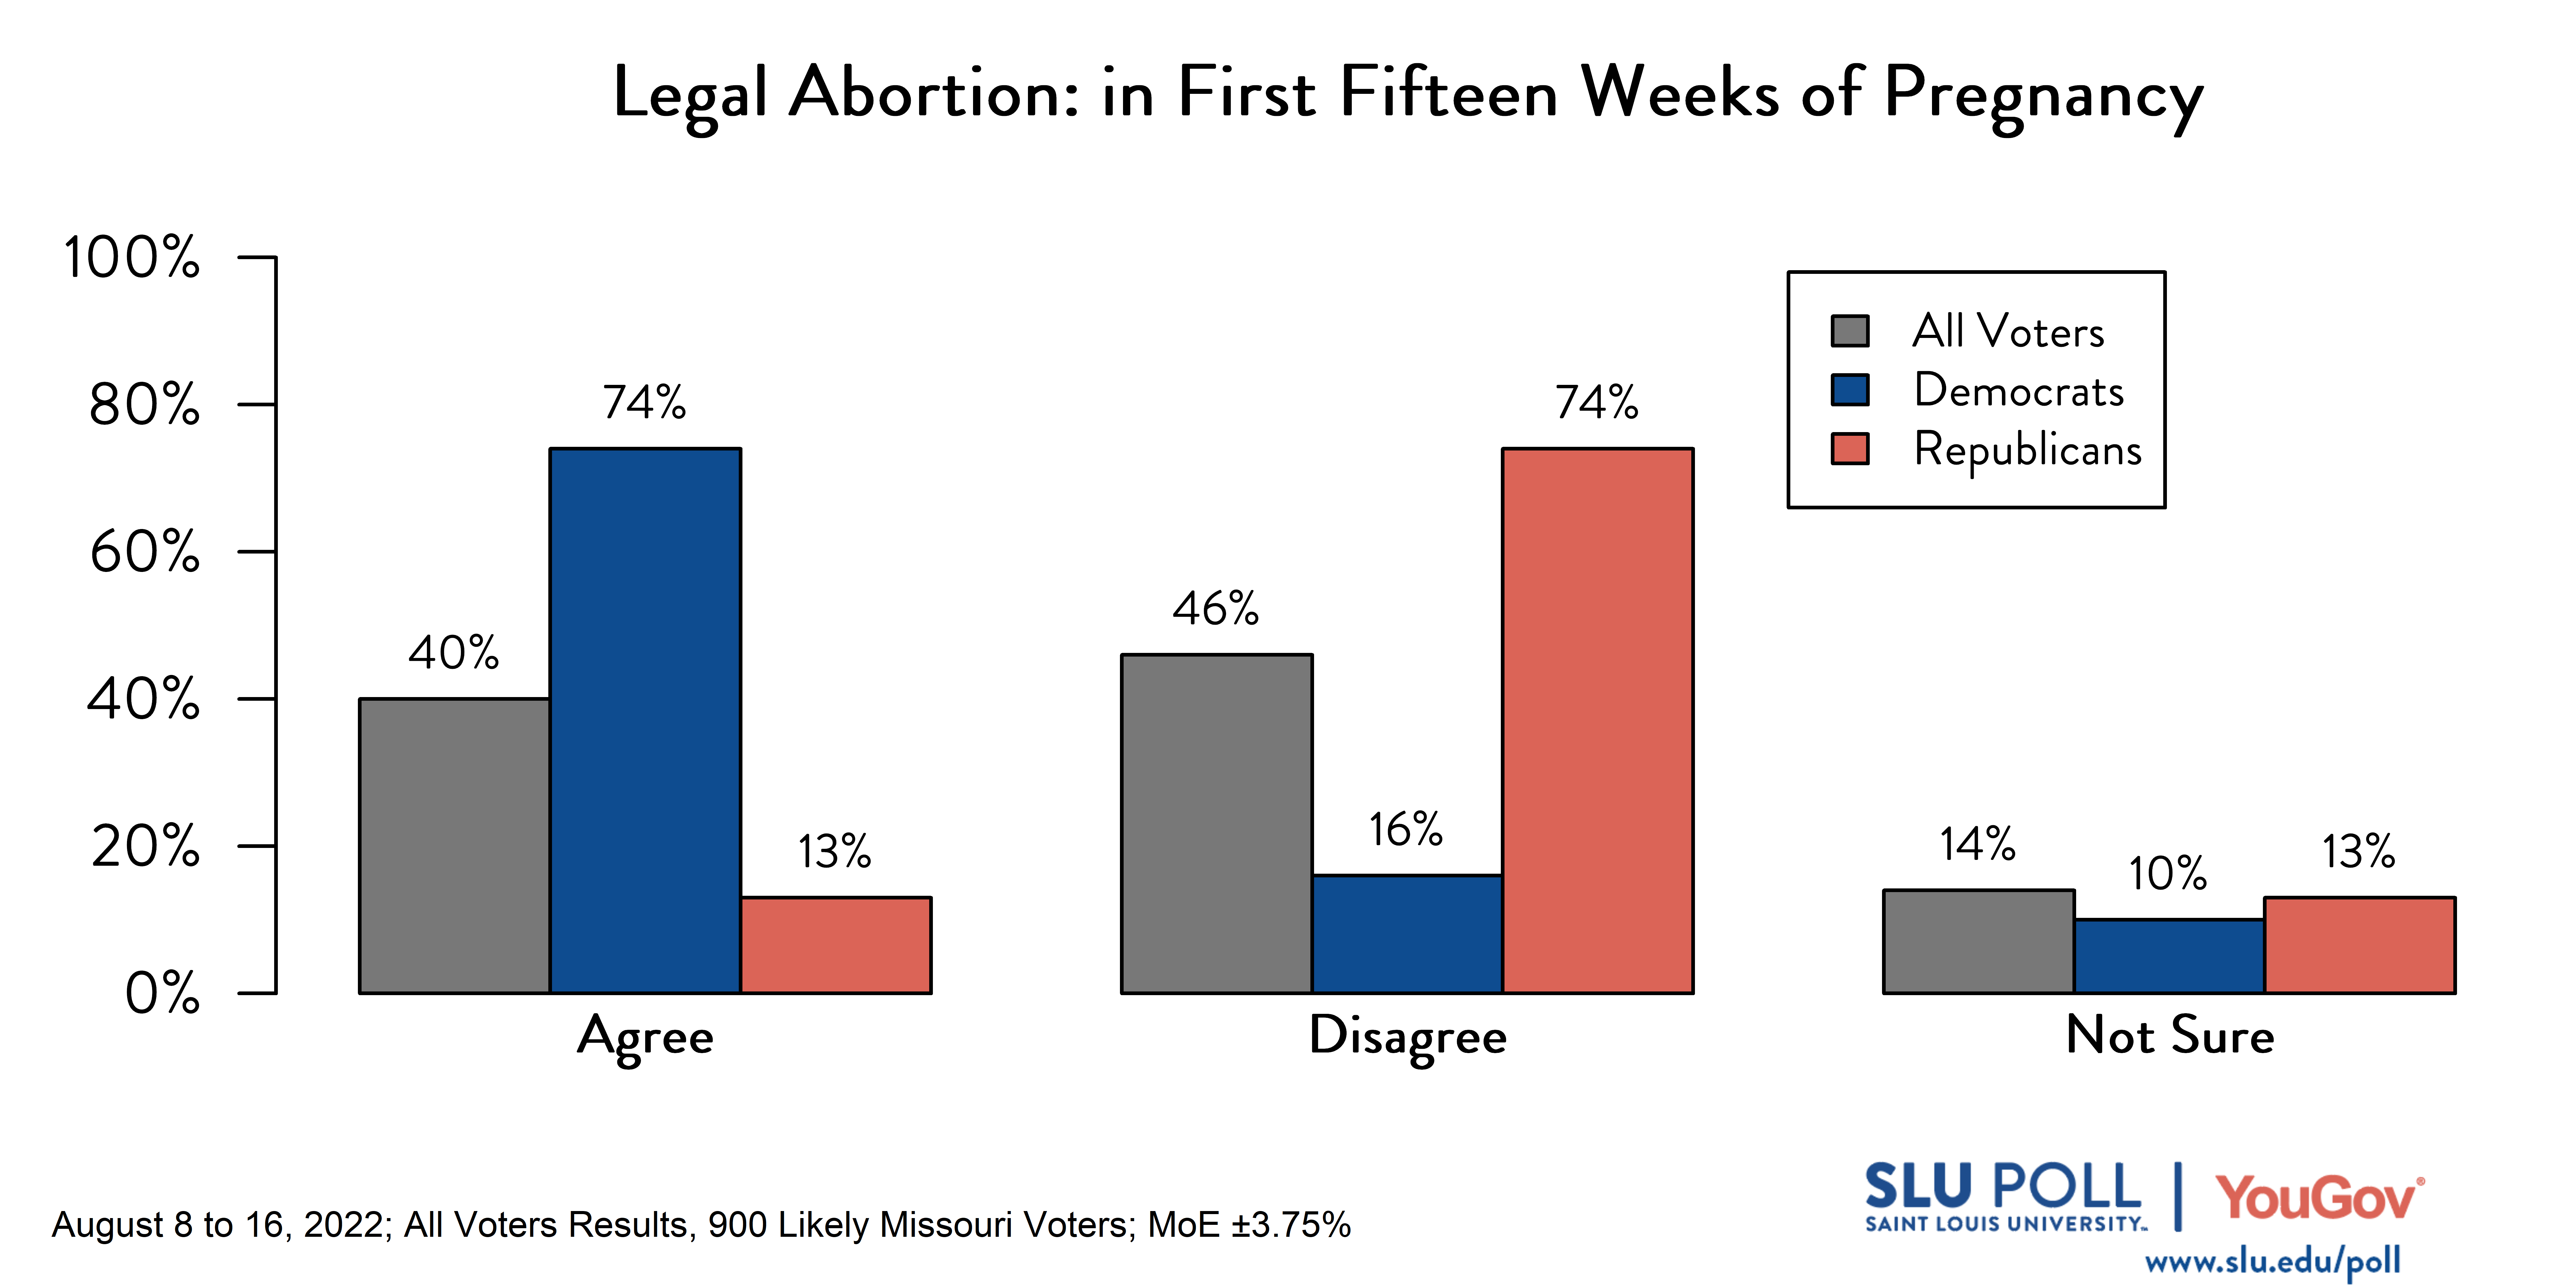 Likely voters' responses to 'Do you think it should be possible for a woman to legally obtain an abortion in the state of Missouri: in the first 15 weeks of the pregnancy?': 40% Agree, 46% Disagree, and 14% Not Sure. Democratic voters' responses: ' 74% Agree, 16% Disagree, and 10% Not Sure. Republican voters' responses: 13% Agree, 74% Disagree, and 13% Not Sure. 